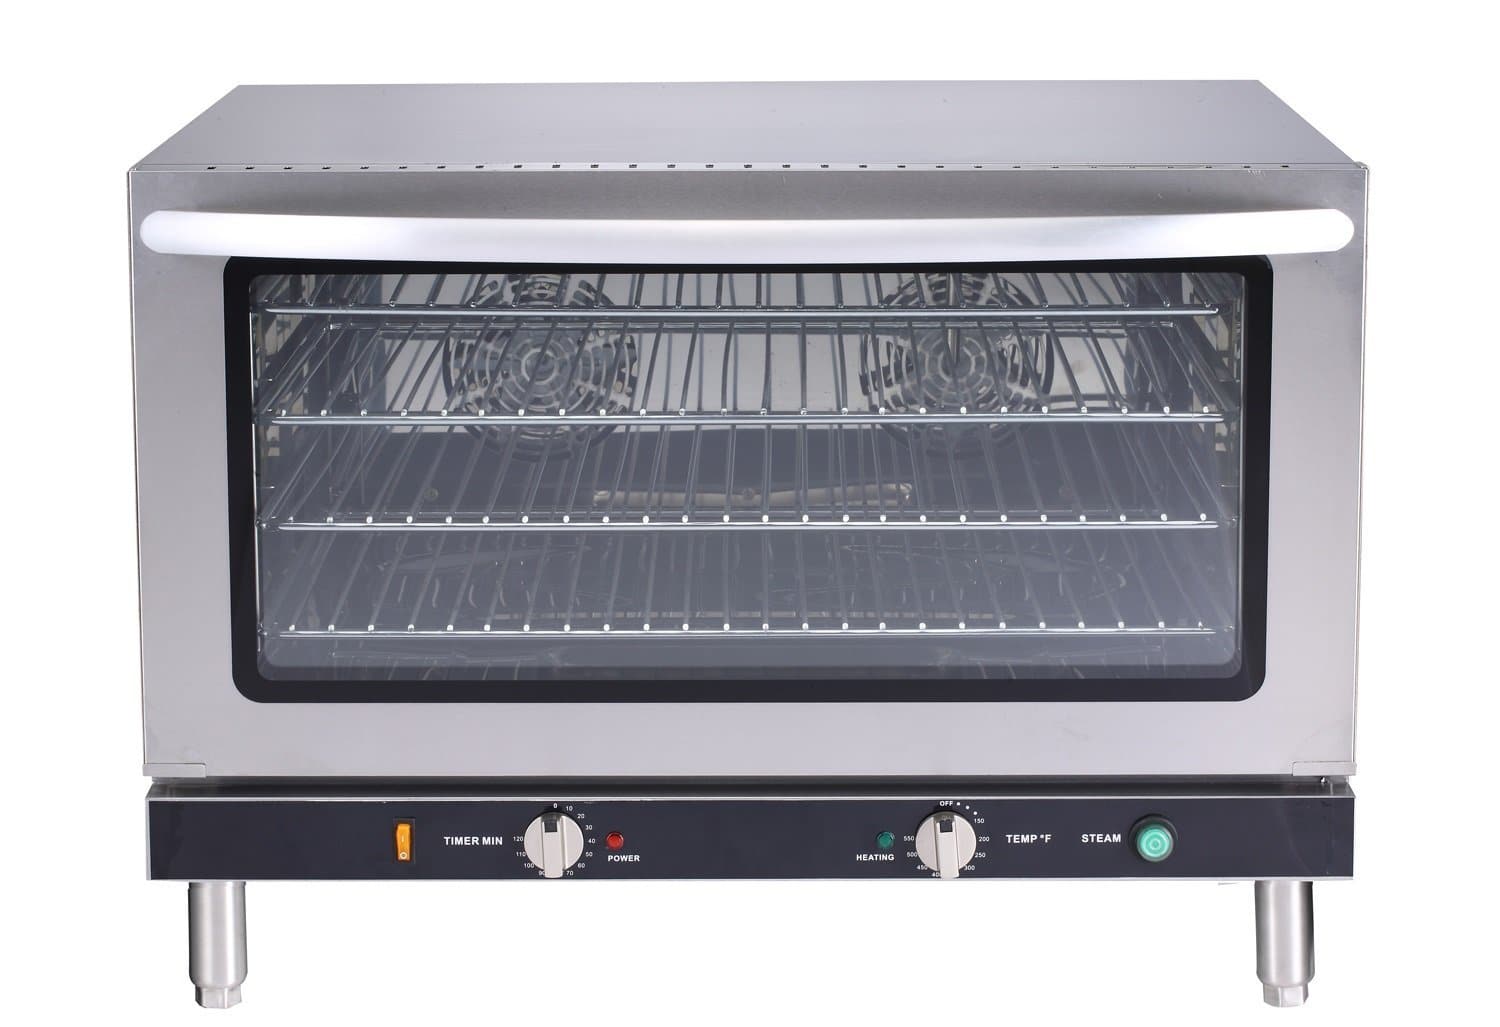 Countertop Convection Oven with Humidity Control, Fits 4 Half Size